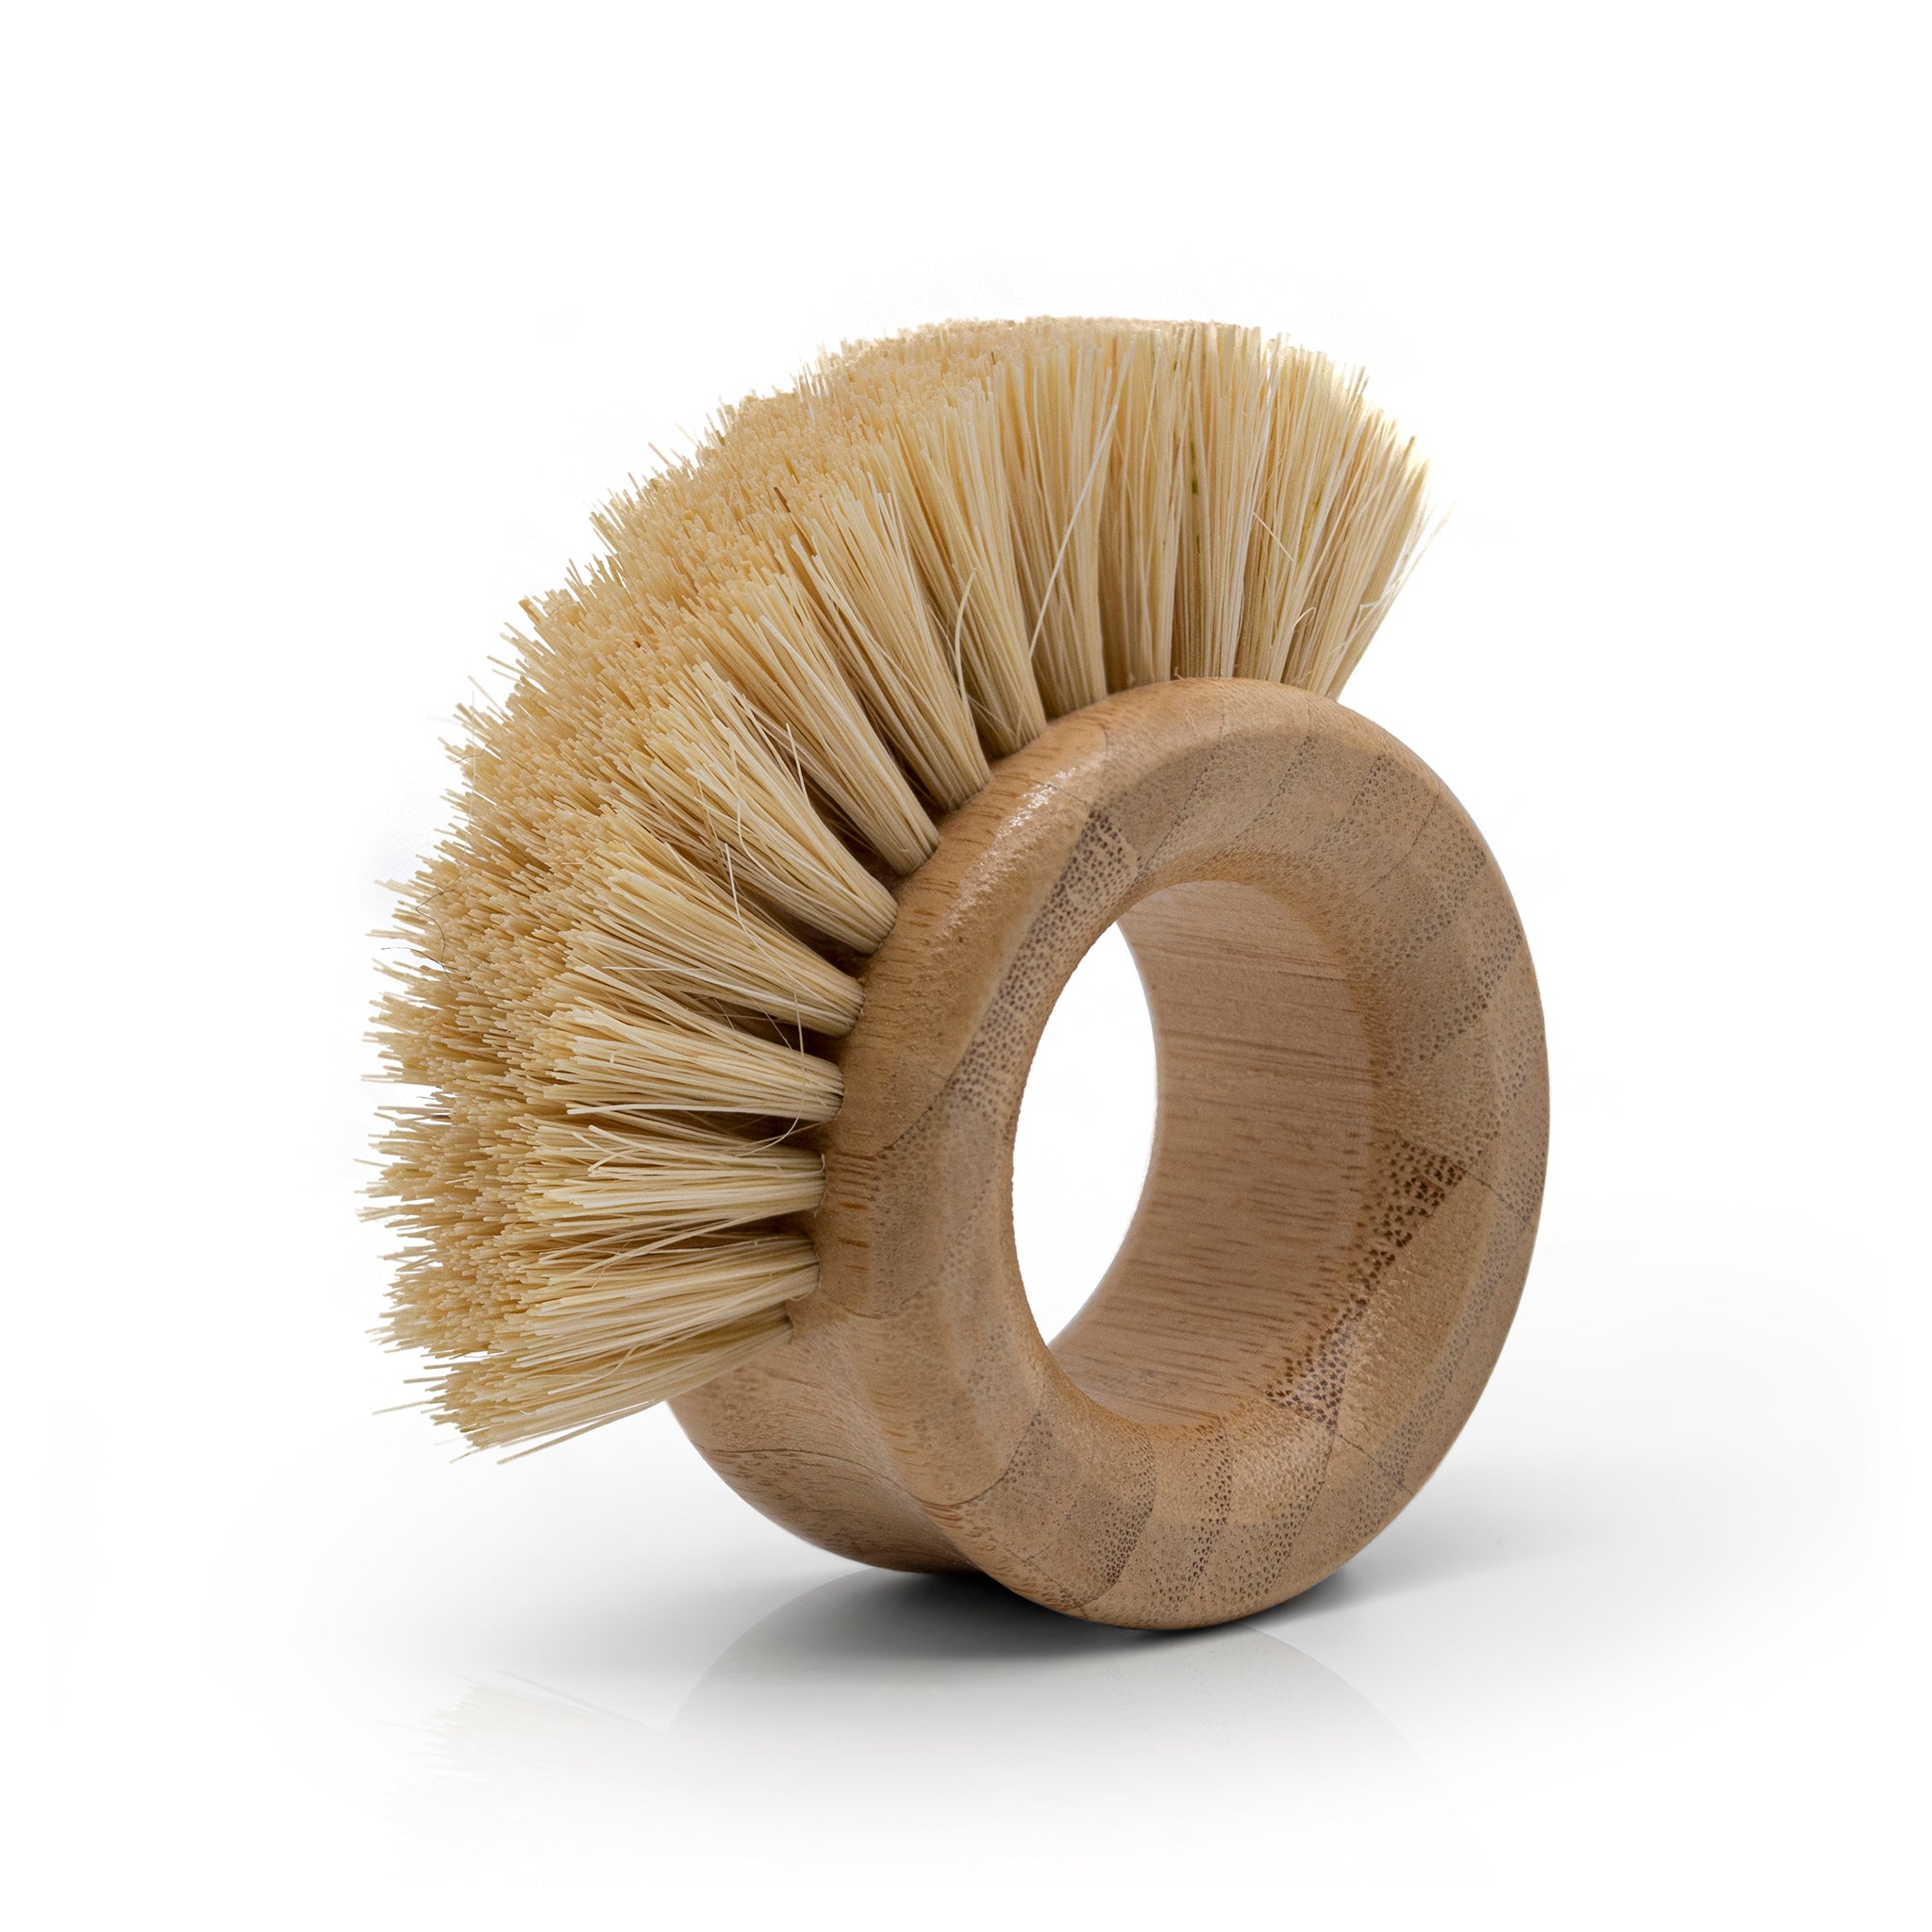 Plastic-free vegetable brush made from sustainably sourced bamboo